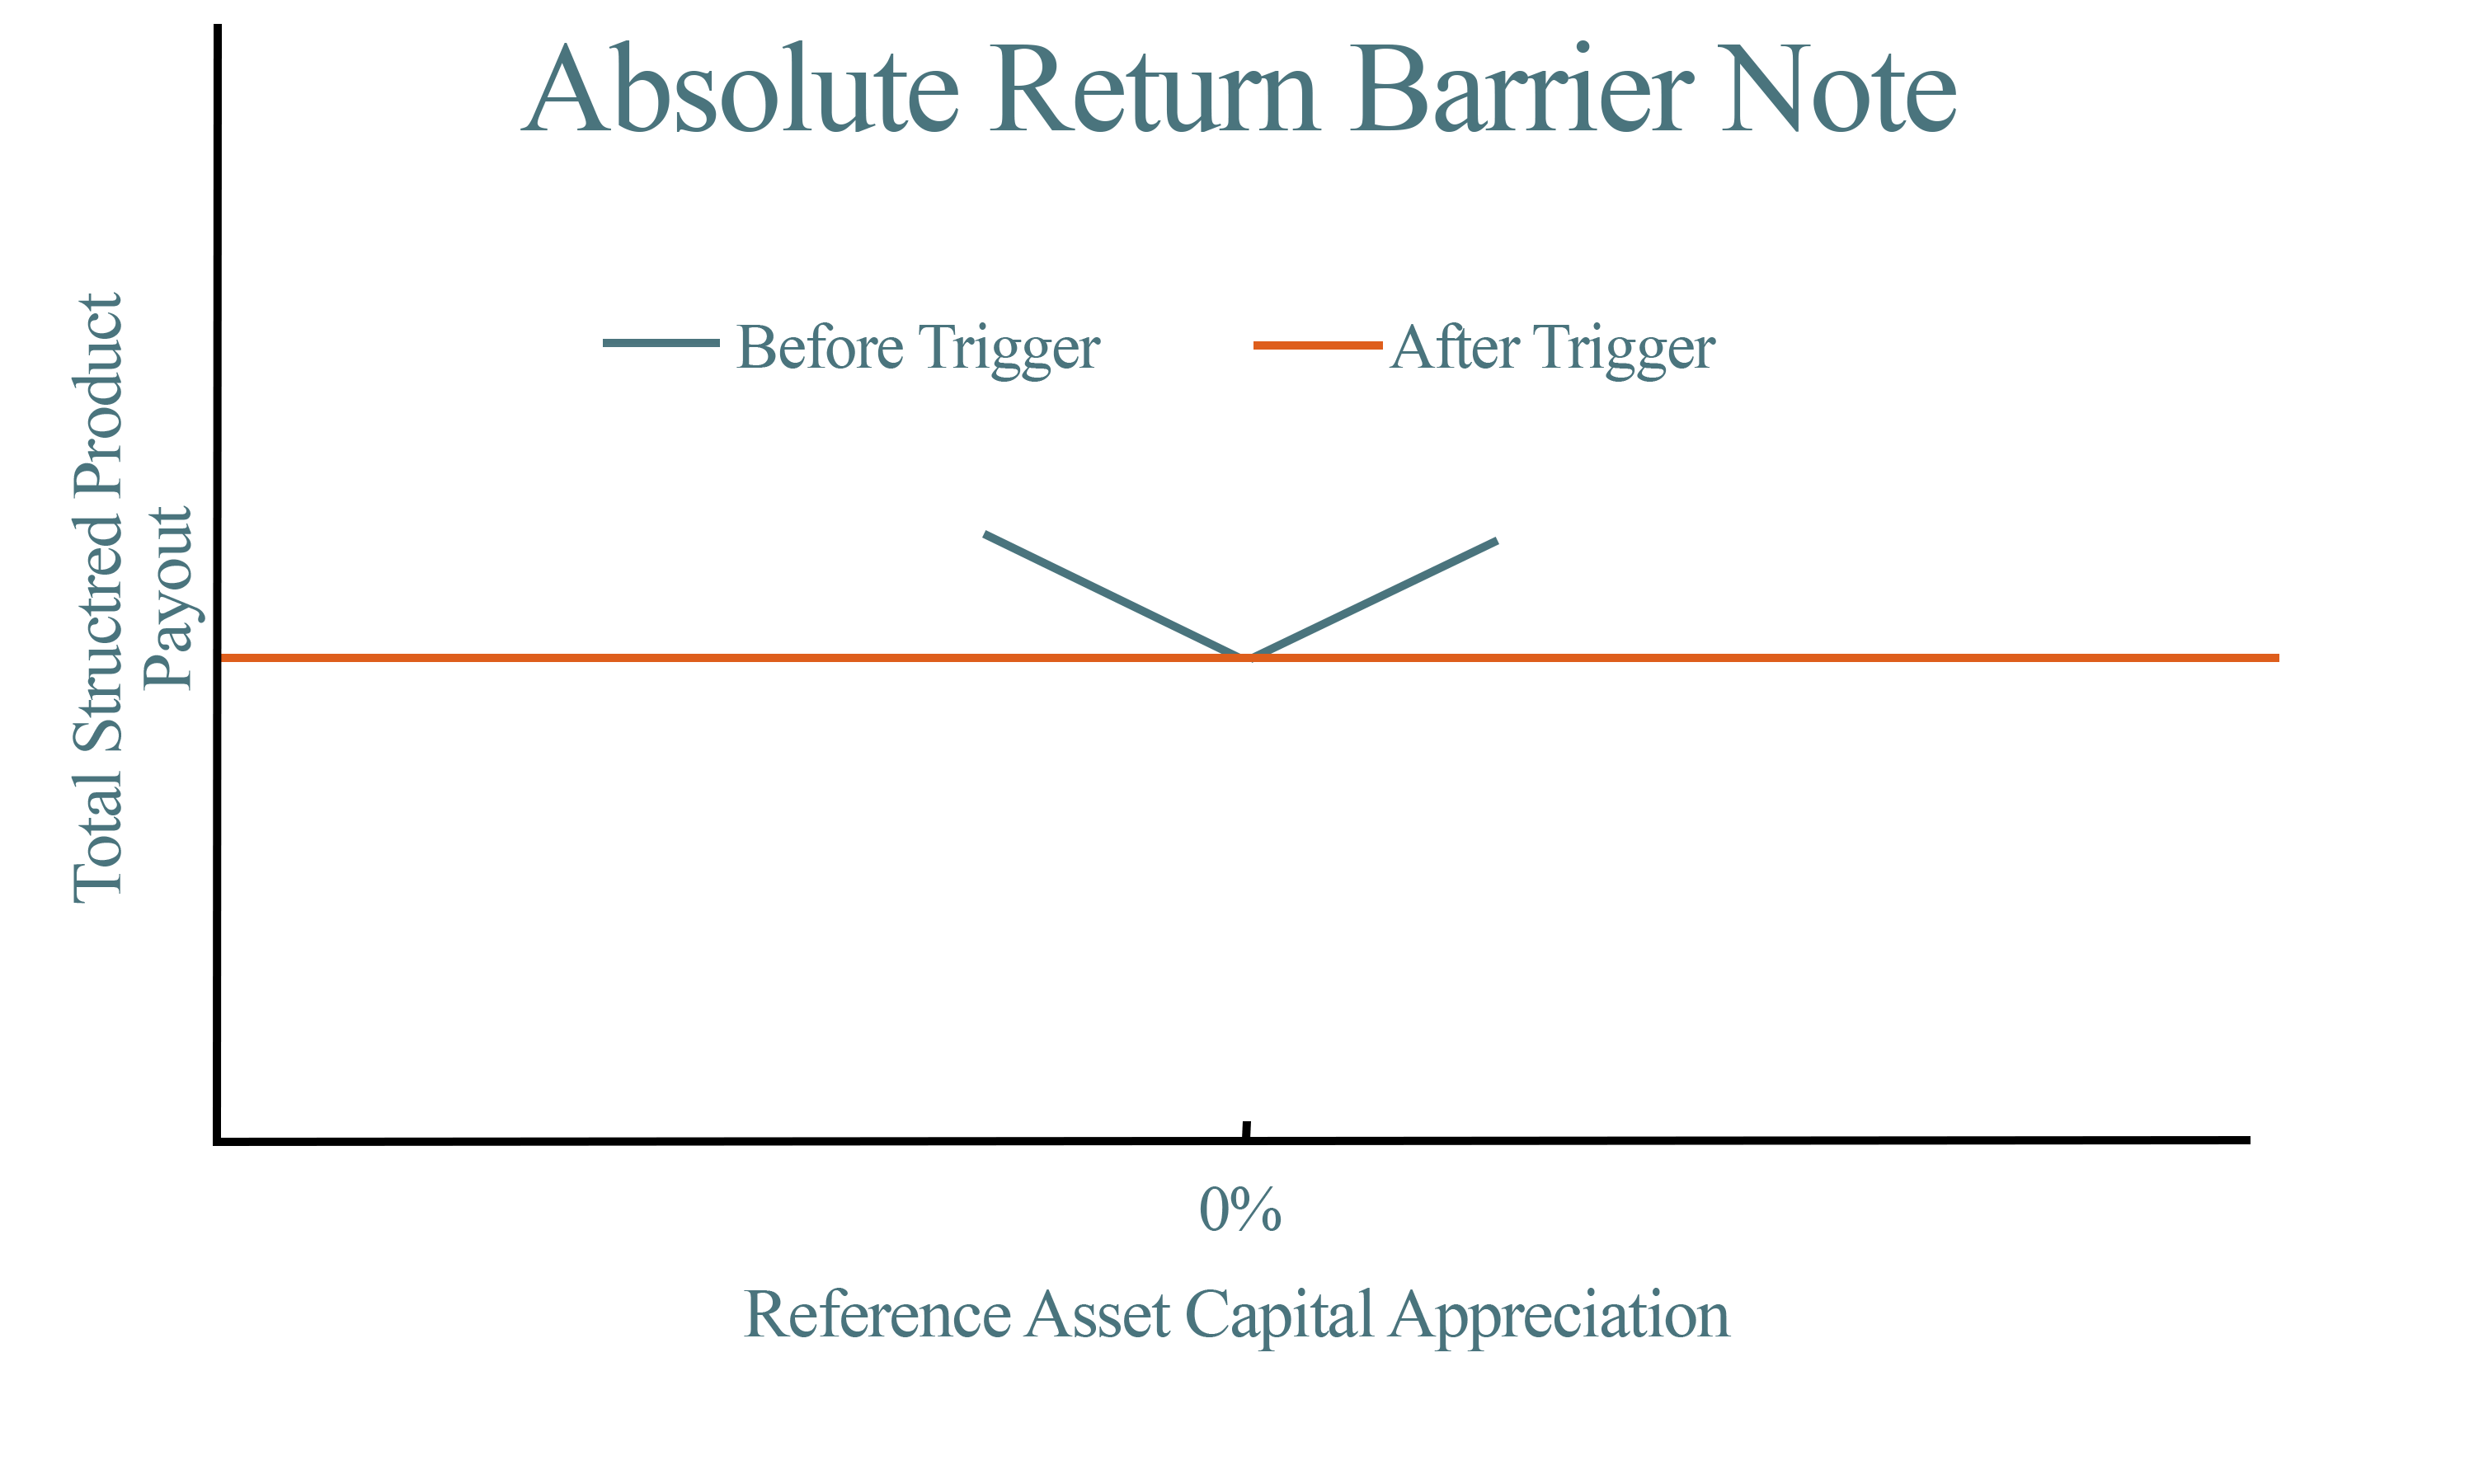 A graph demonstrating payout over capital appreciation for Absolute Barrier Return Notes